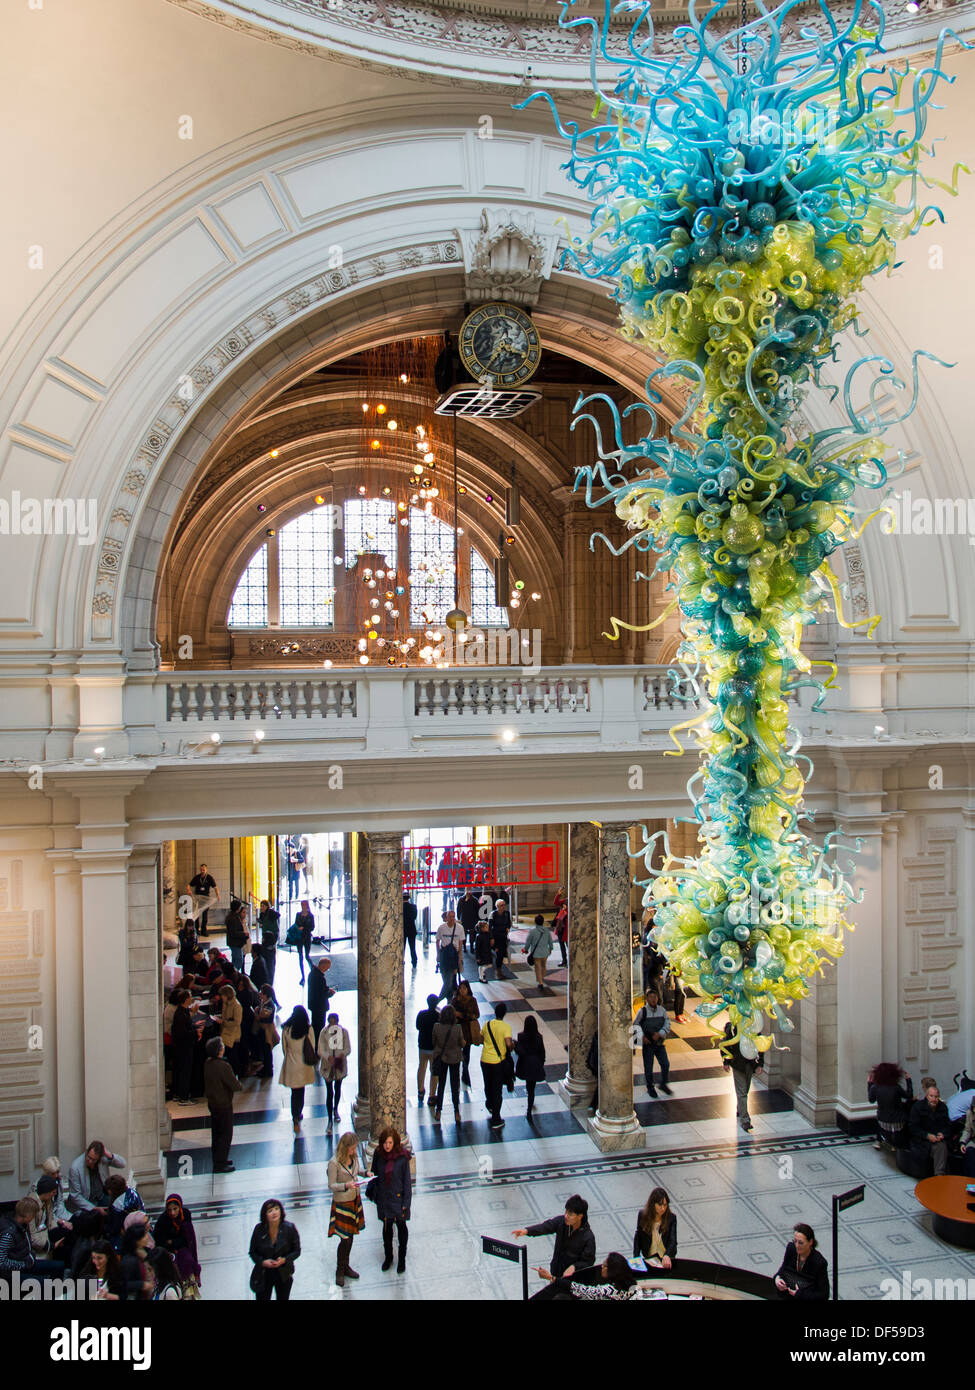 The Victoria and Albert Museum, London - hanging glass sculpture in the atrium. 3 Stock Photo